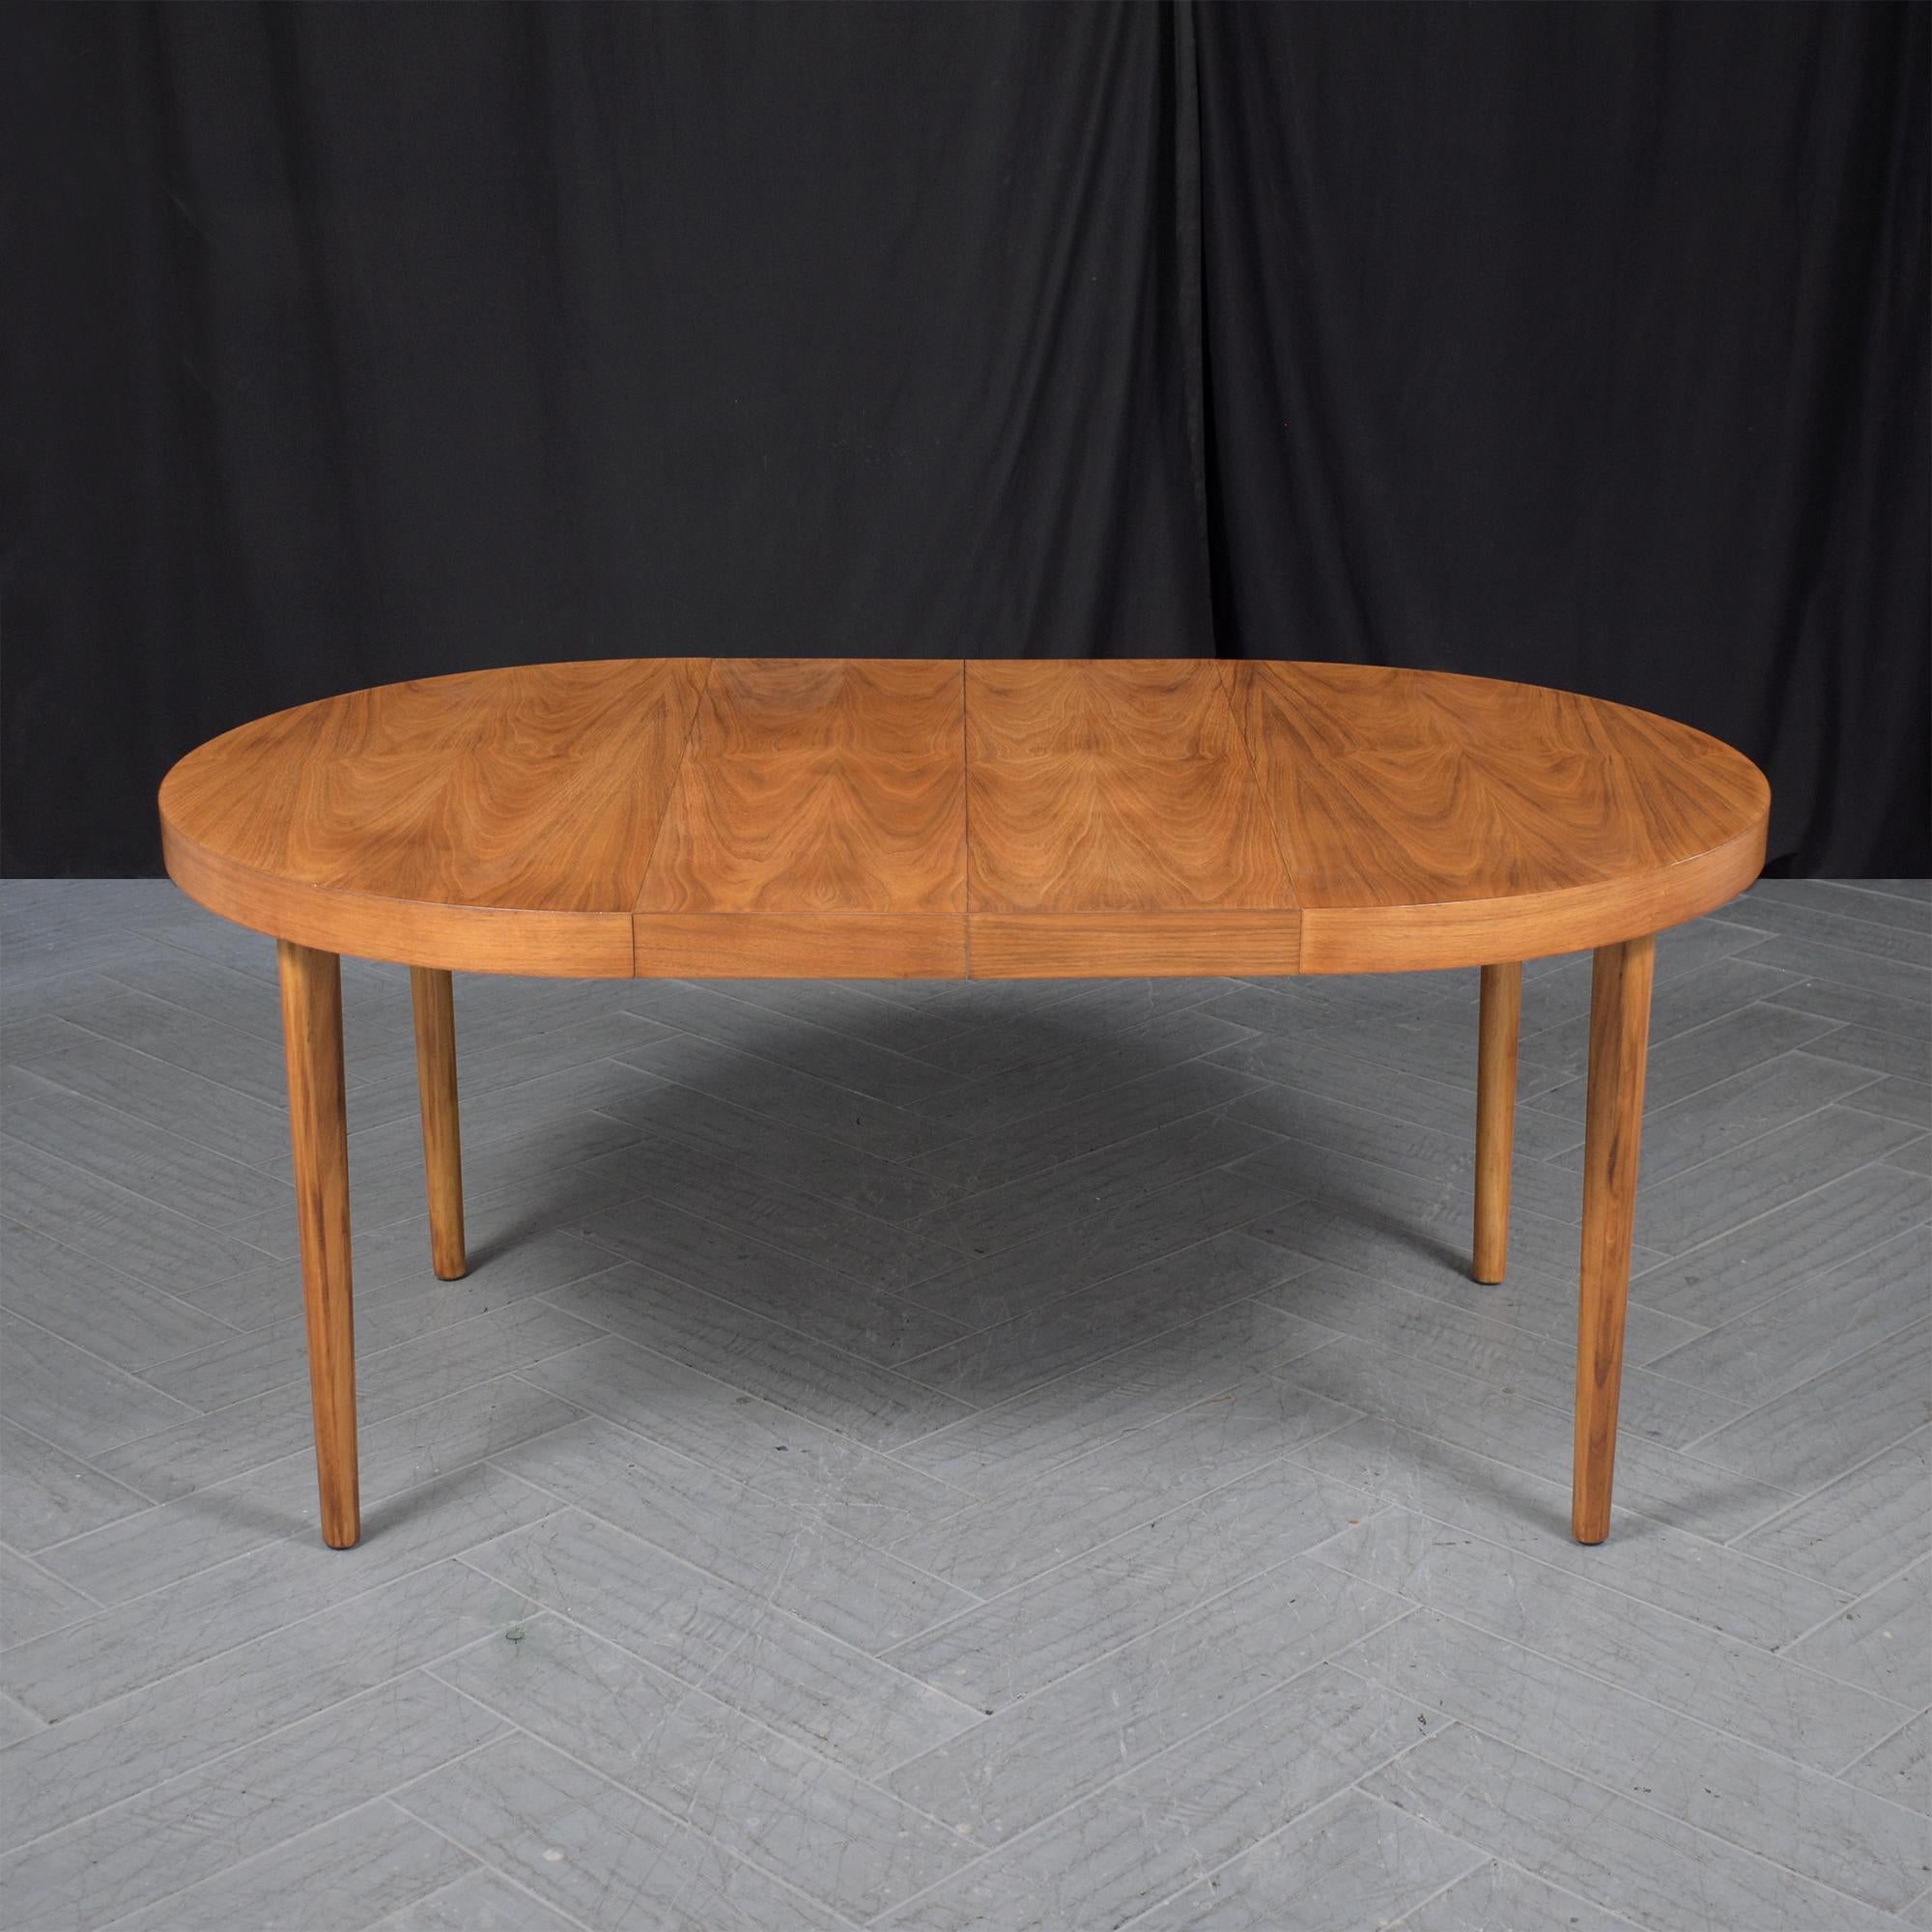 Experience the elegance of the mid-century era with our meticulously restored dining table. This striking round dining table, crafted from top-grade walnut wood, showcases the artistry of its time. It has been brought back to its original glory by